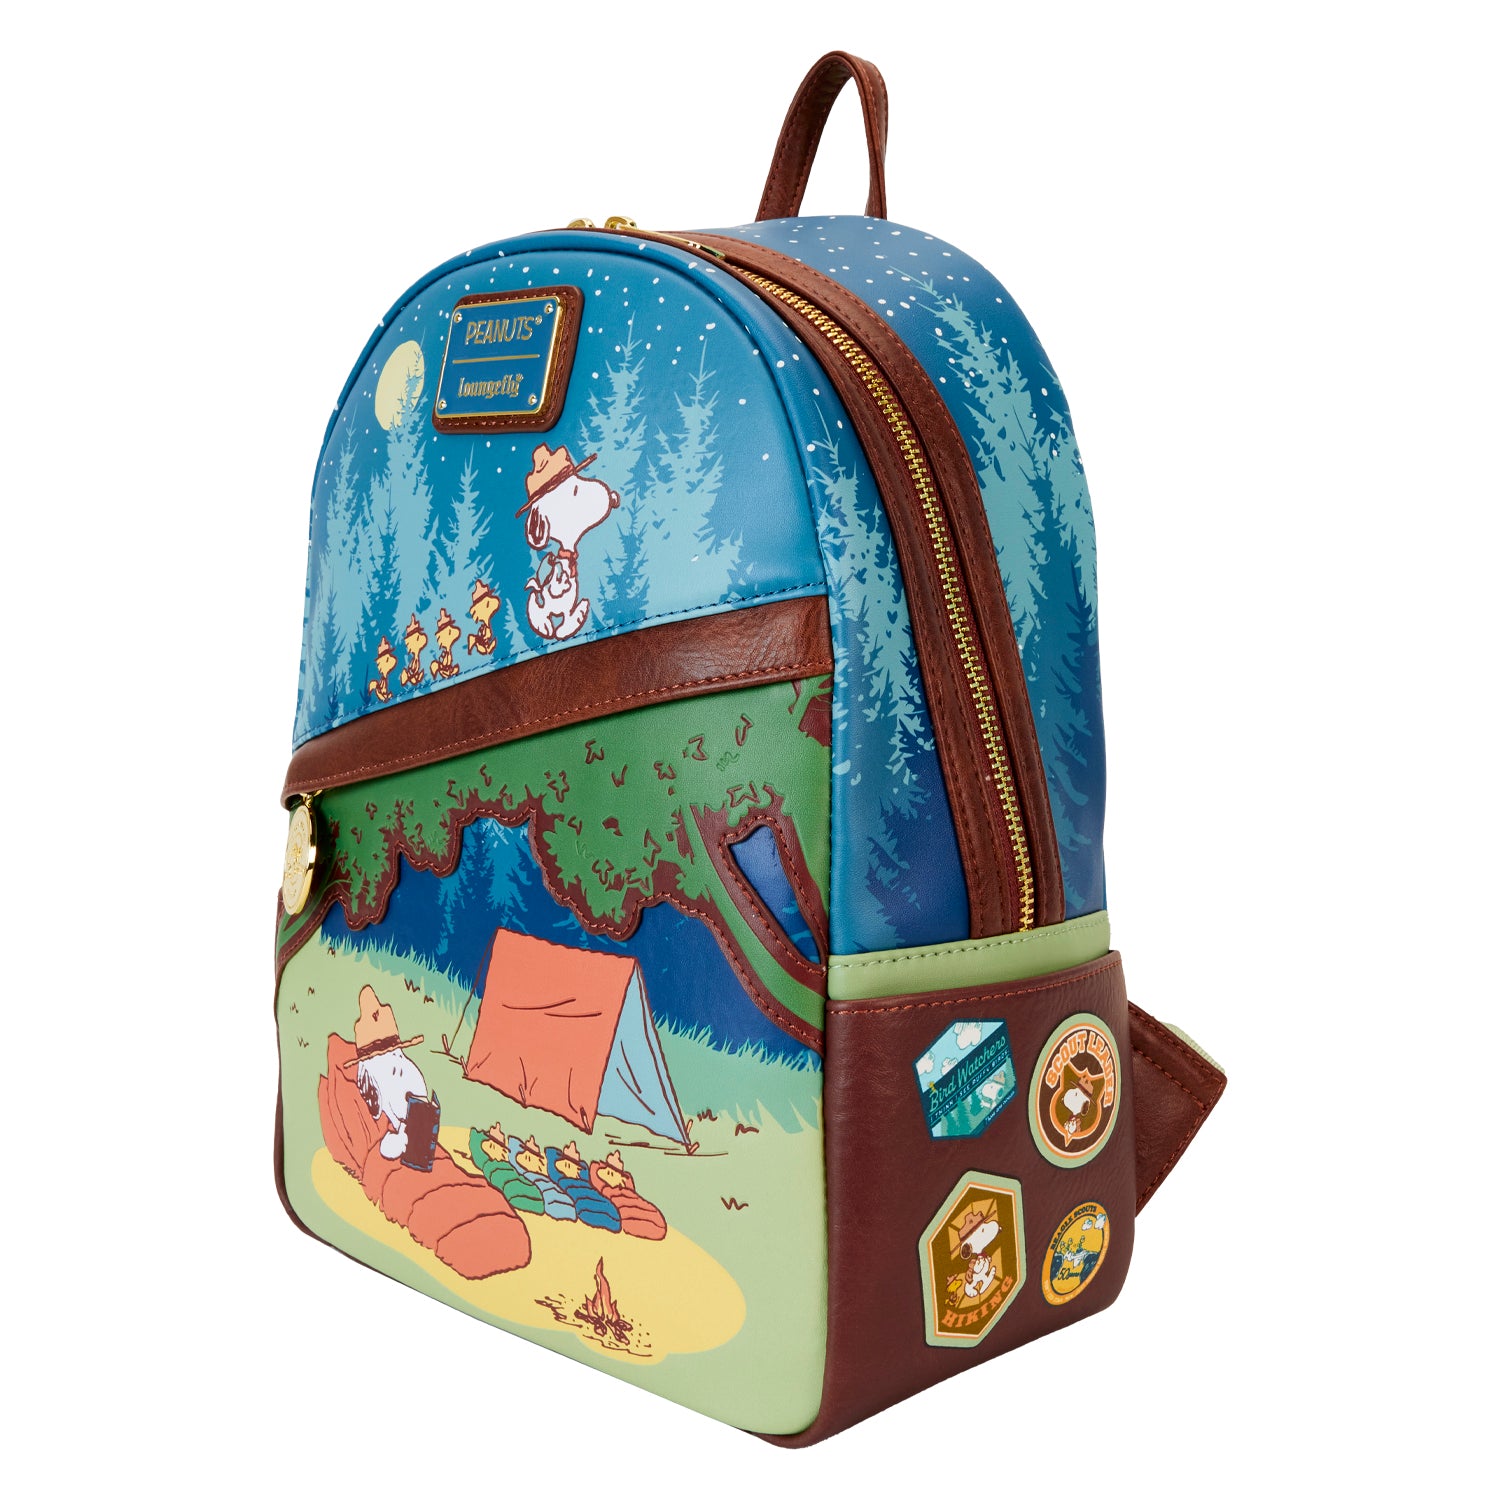 Loungefly Peanuts Beagle Scouts 50th Anniversary Mini Backpack